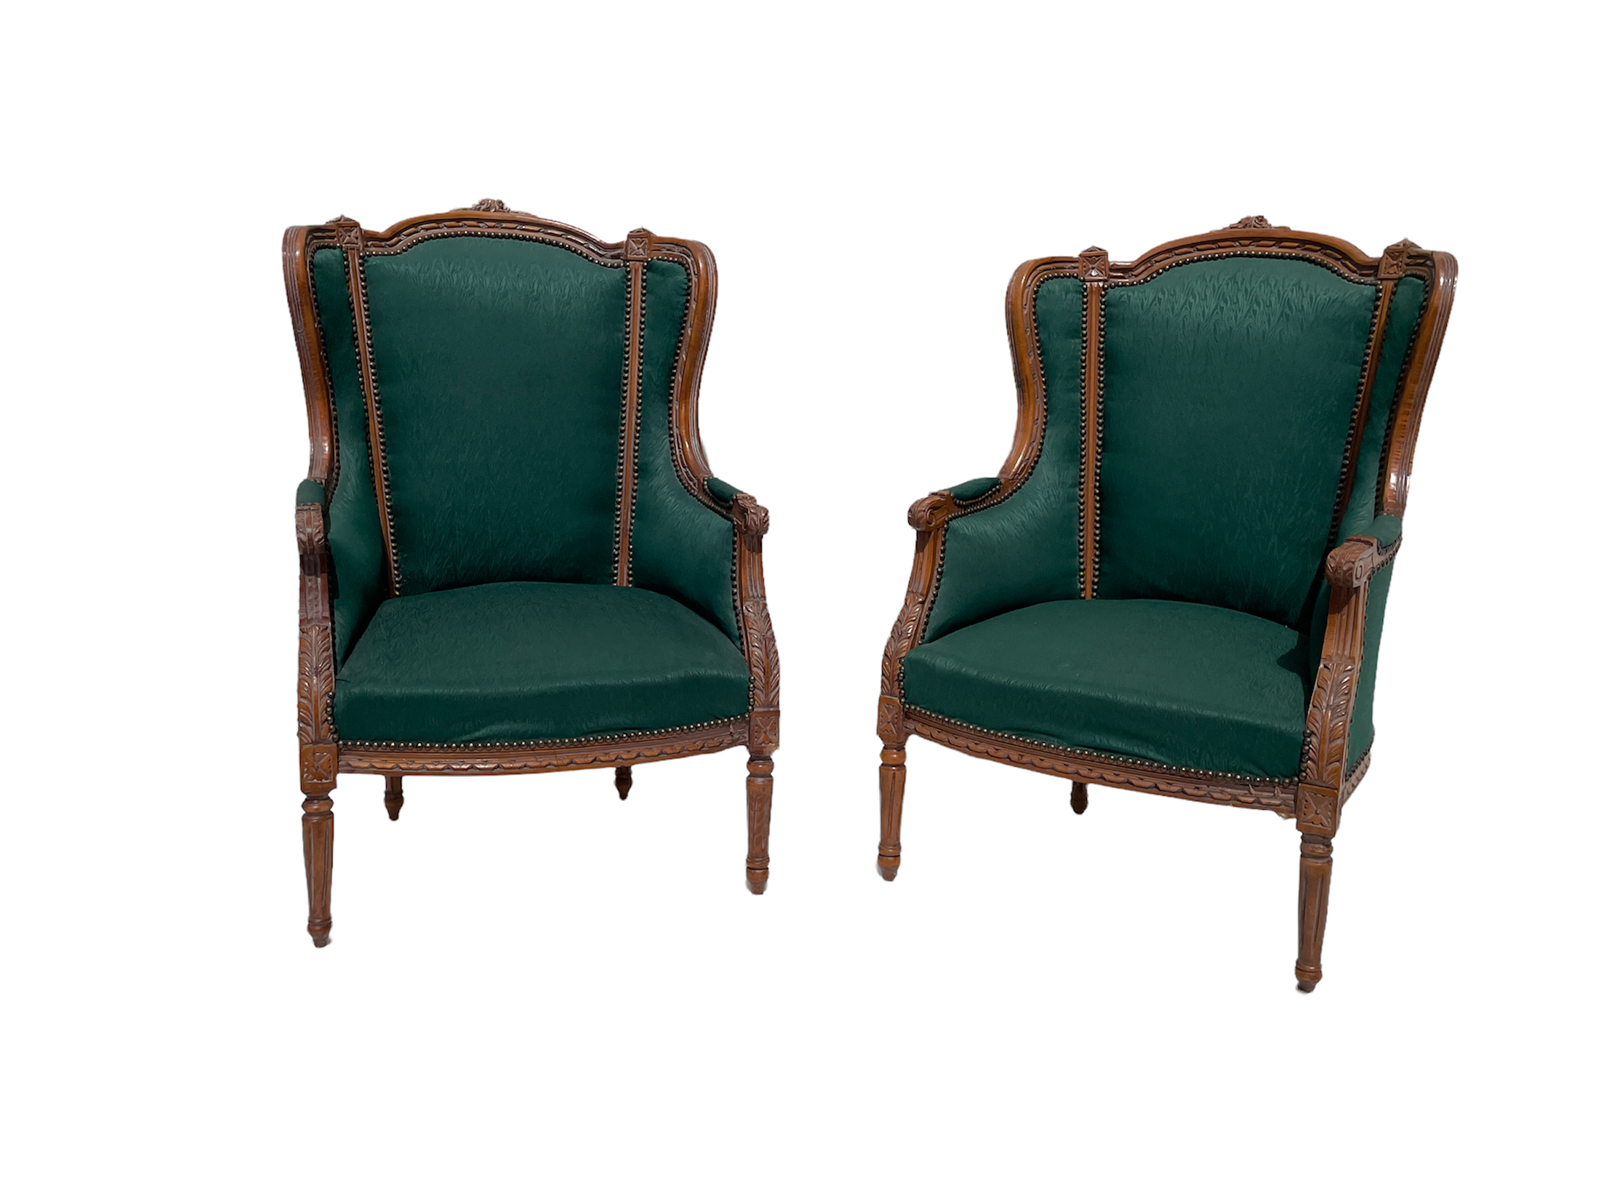 PAIR CARVED WING BACK CHAIRS: Pair